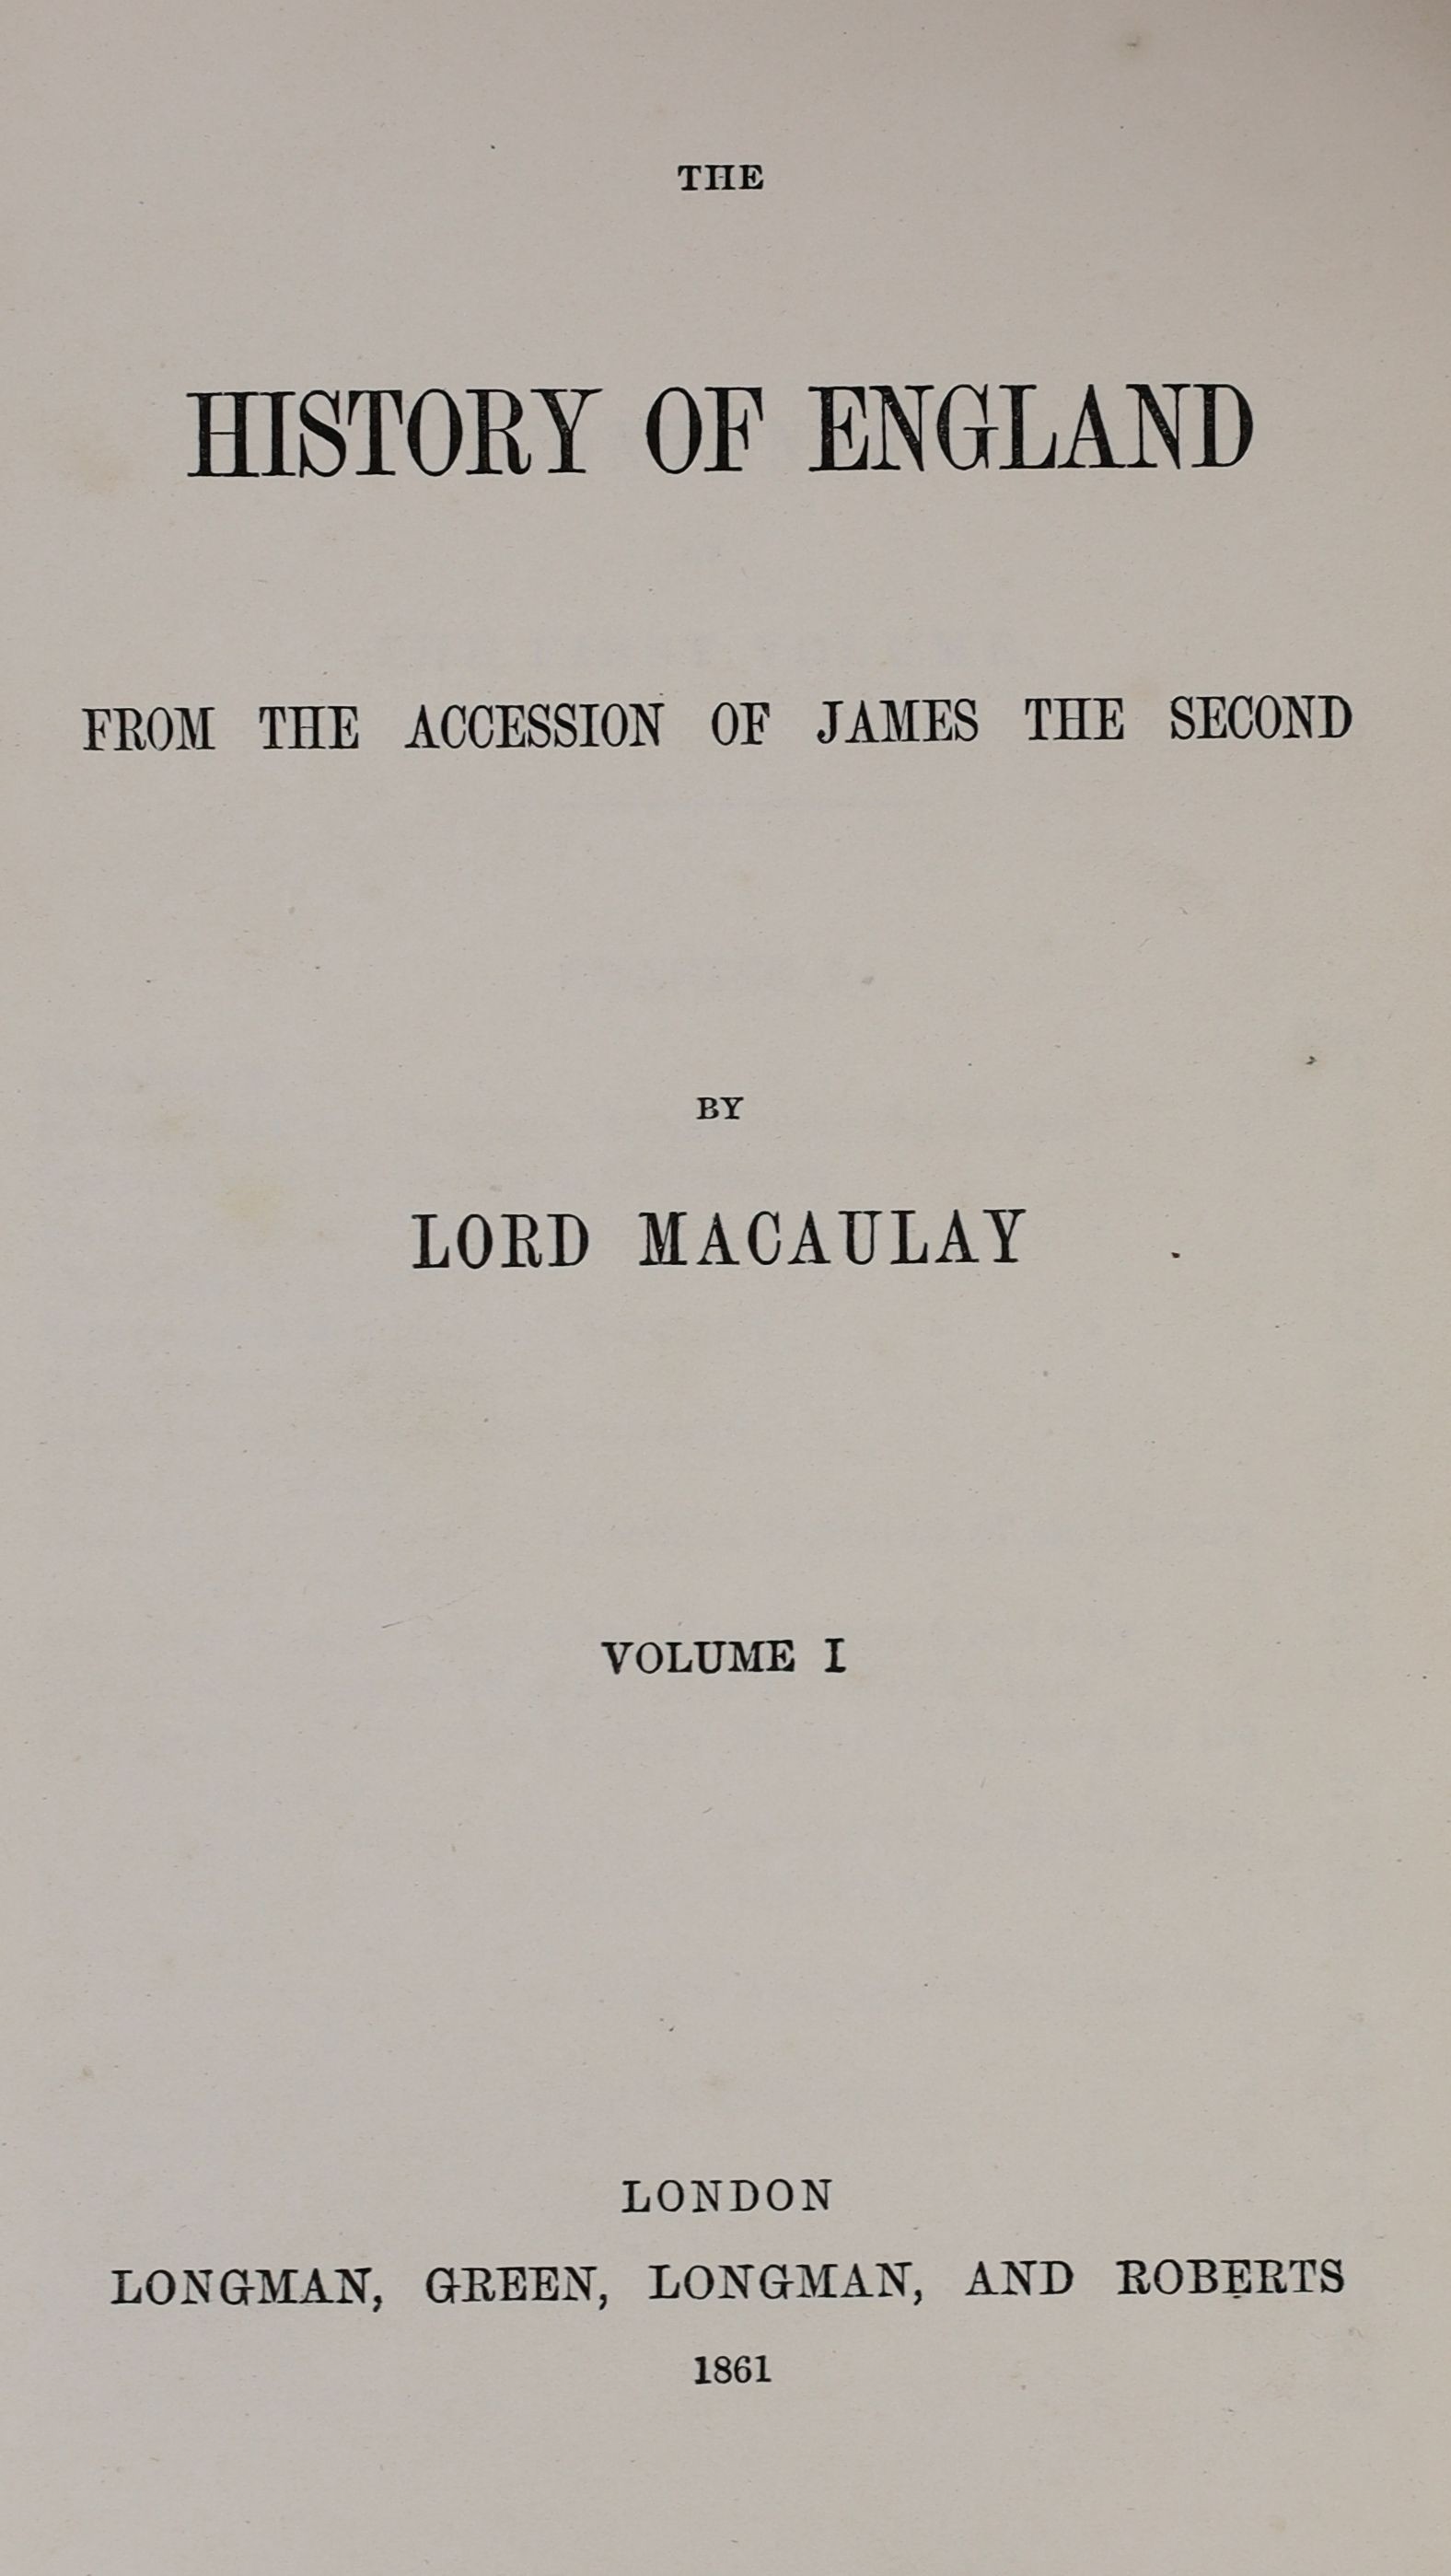 Macaulay, Lord - The History of England from the Accession of James the Second, 5 vols. contemp. gilt-ruled calf, gilt decorated panelled spines with red and green labels. 1861